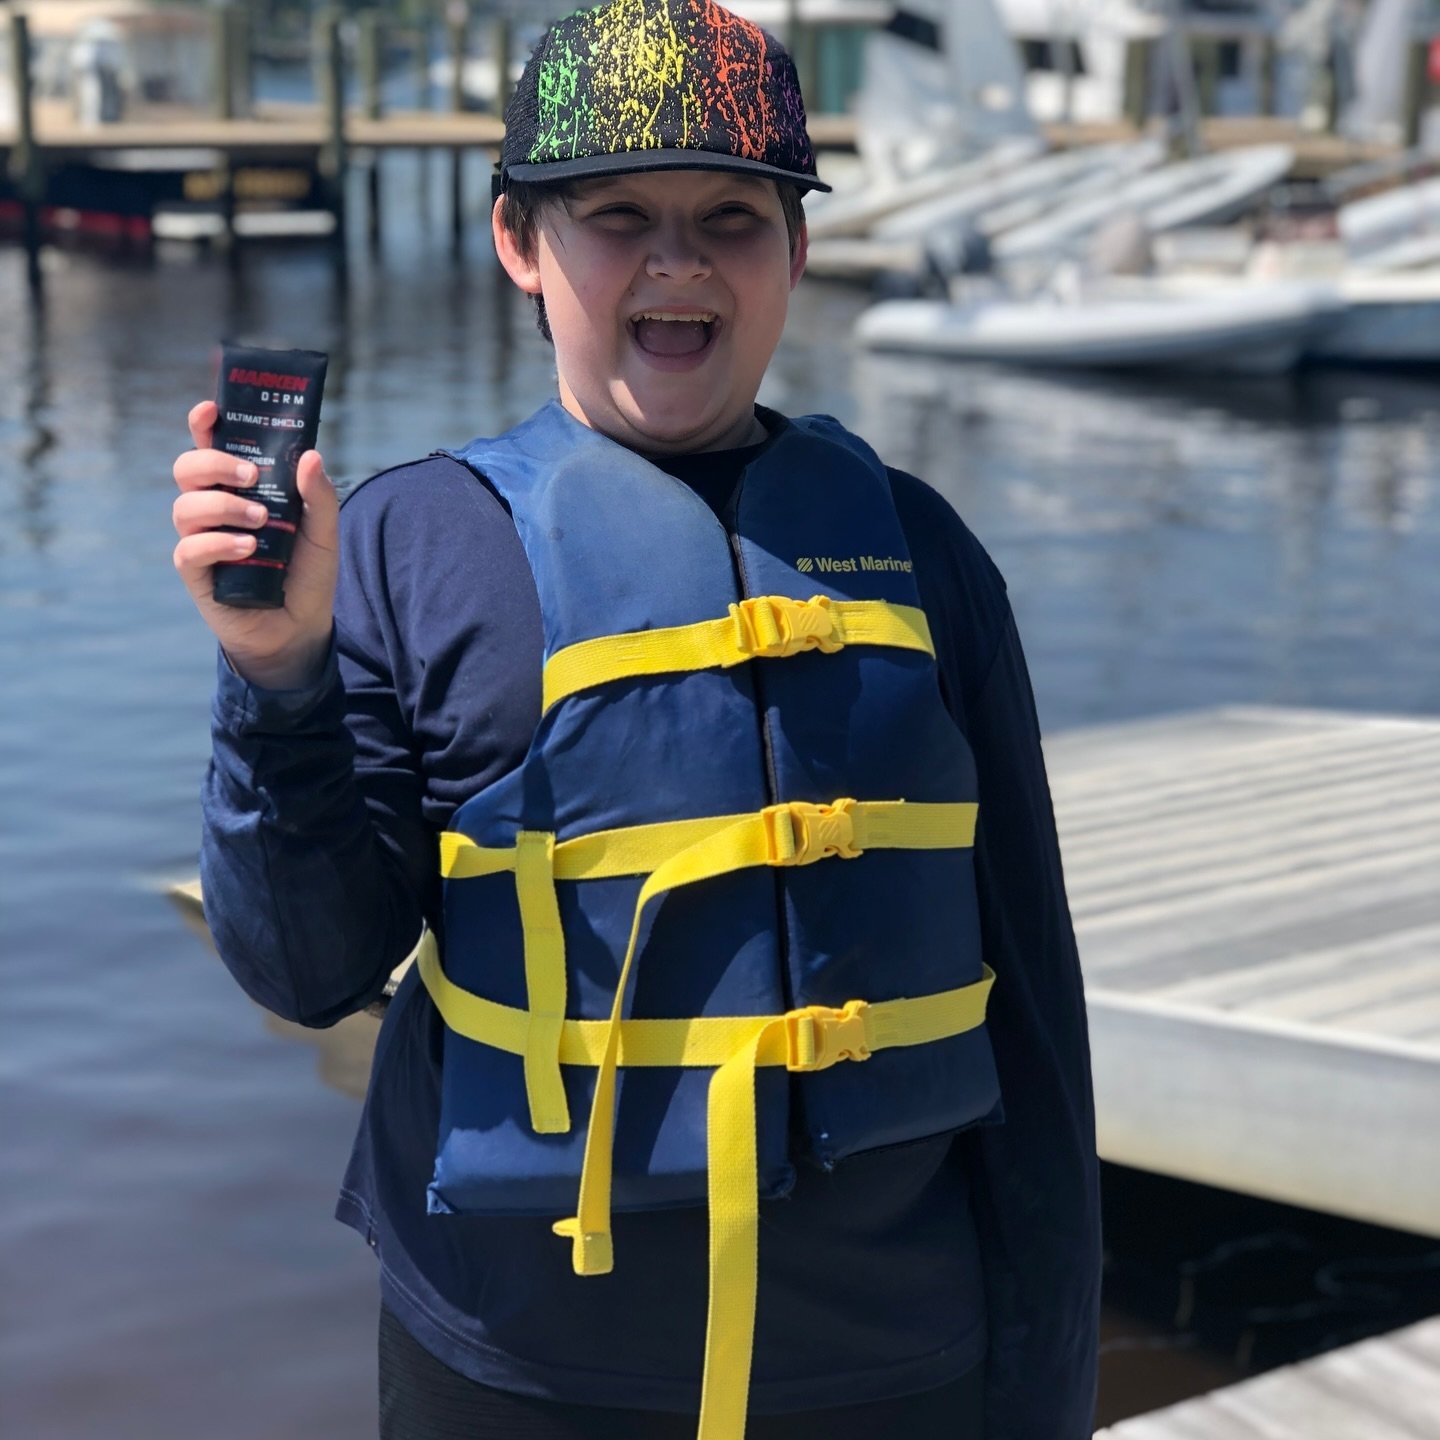 As we continue to safeguard the skin and the safety of the kids at Spectrum Sailing during their sailing adventures, we hope to remind you protect your skin and your child's skin during any outdoor activities with Harken Derm mineral sunscreen. 

#Ha